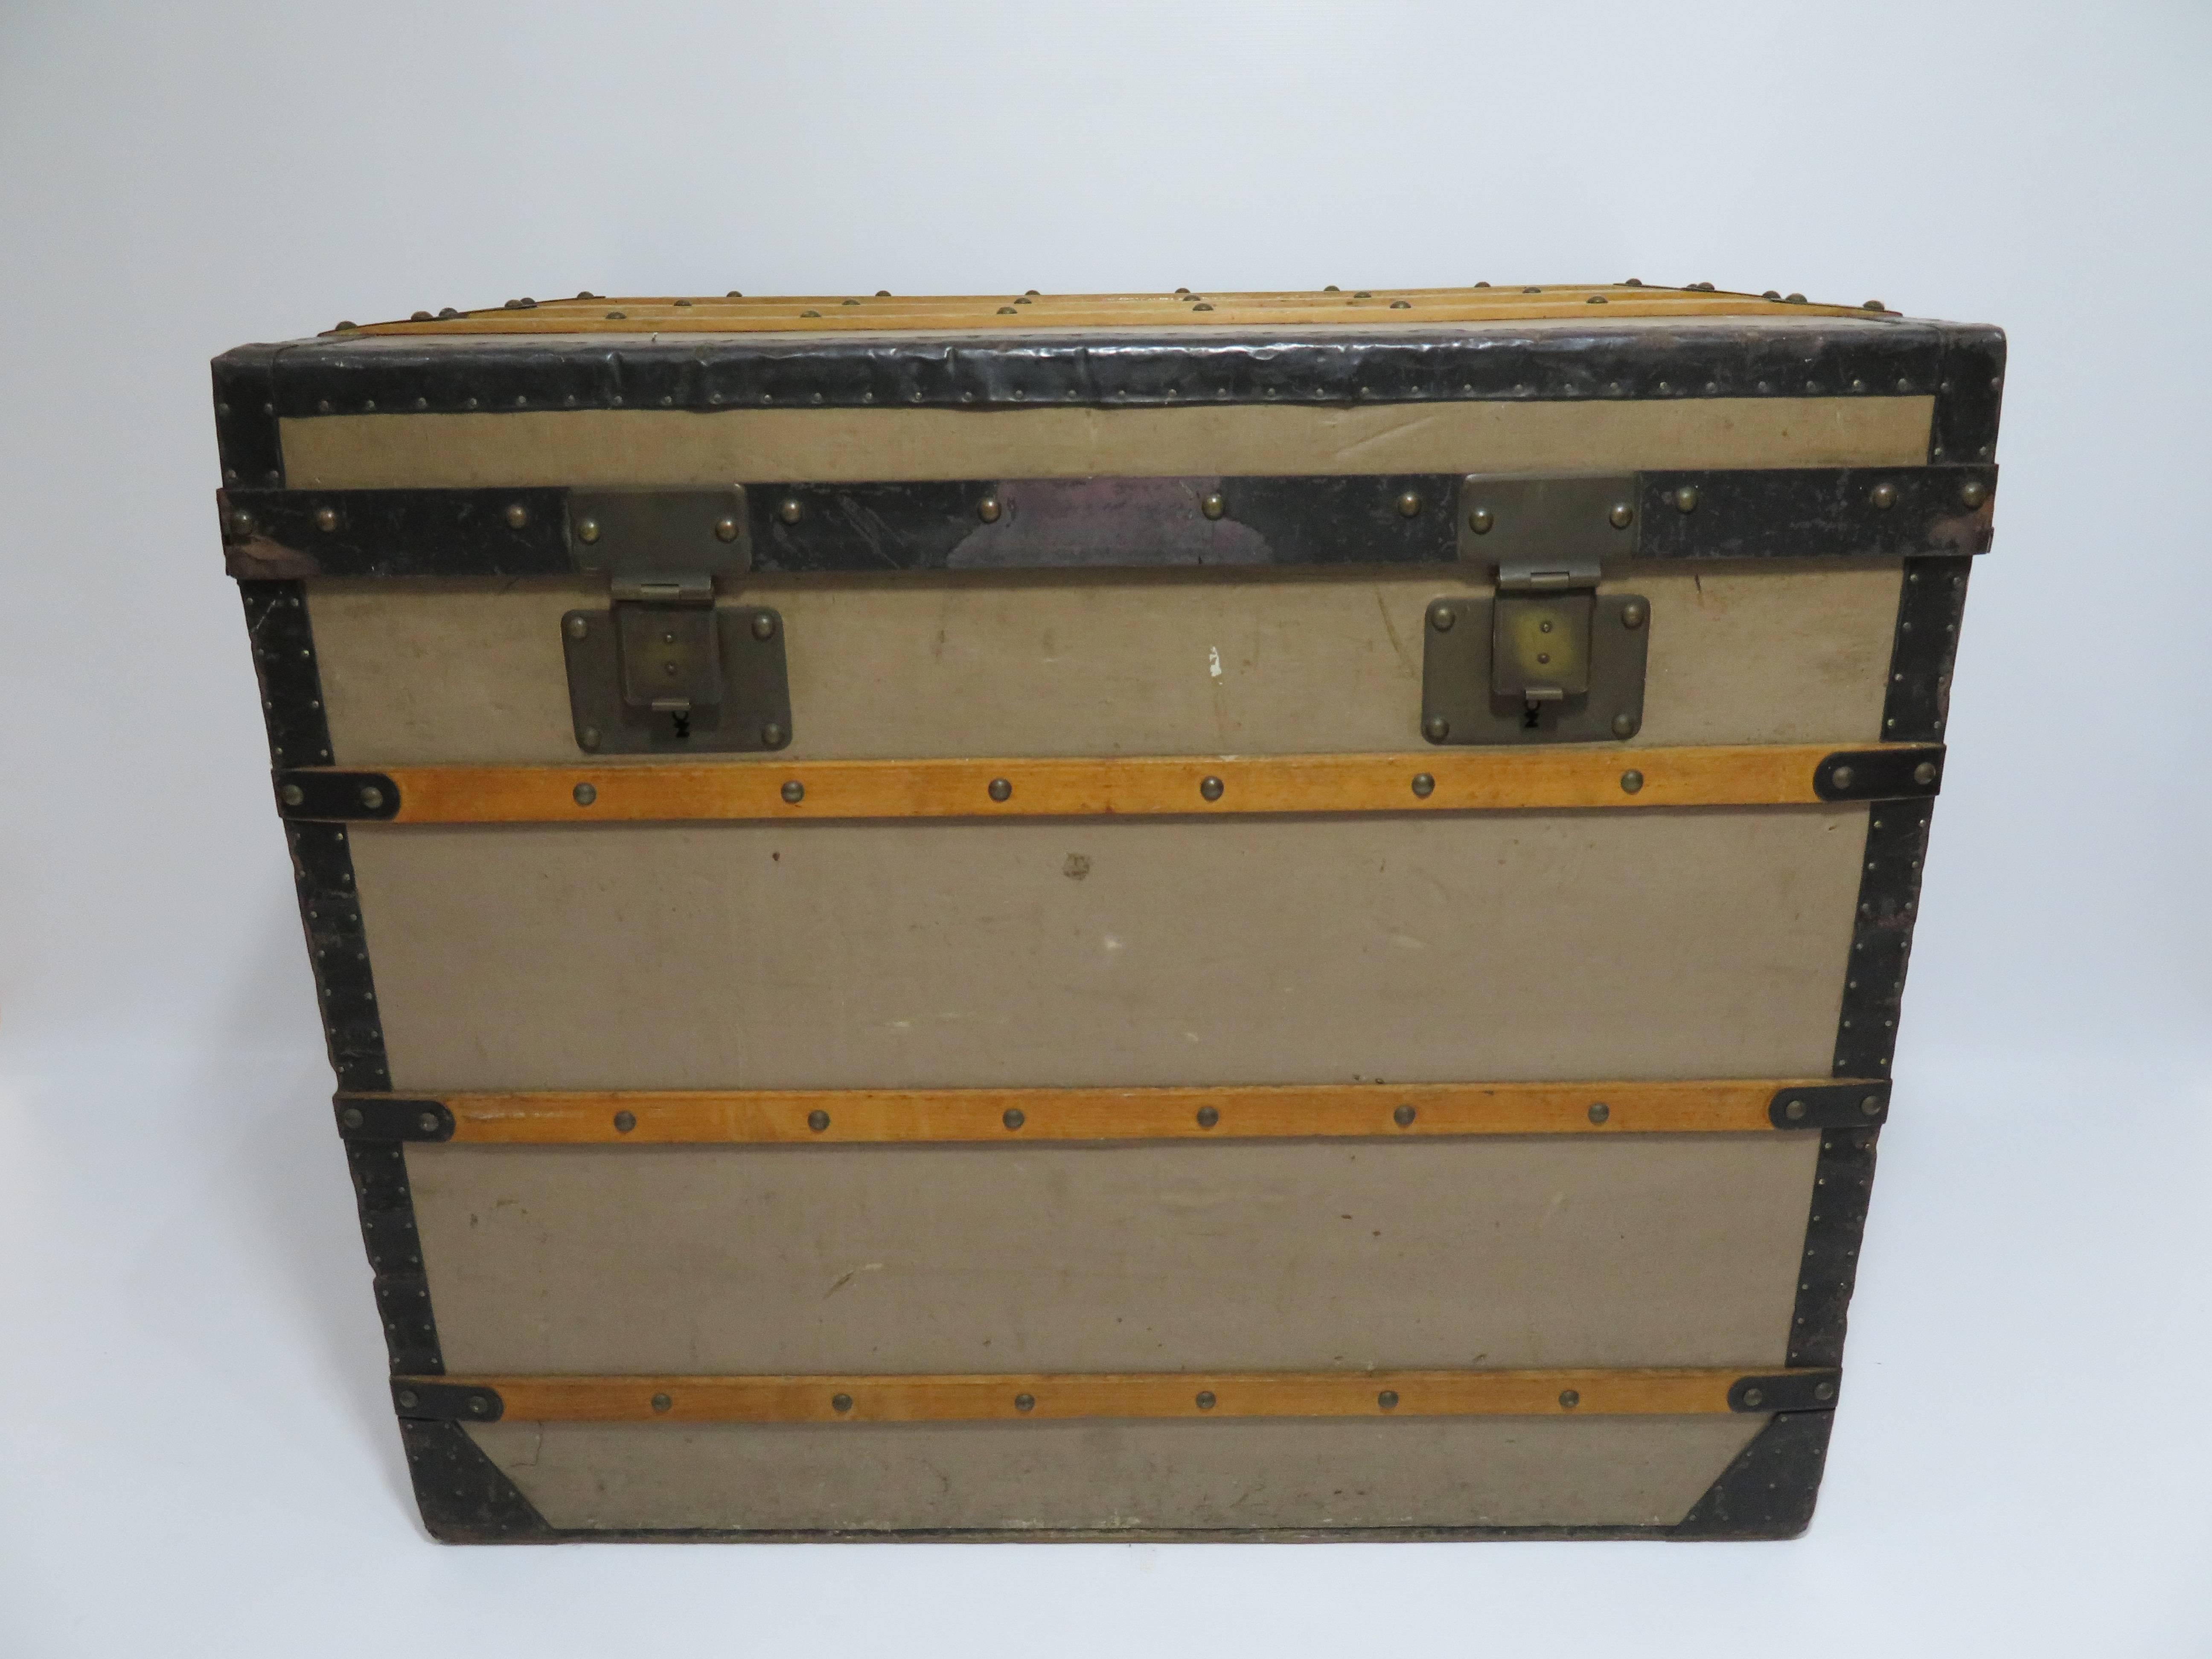 For sale the trunk that changed the future of Louis Vuitton, as it was the first flat top trunk he designed and manufactured back in 1850s.
Made before 1859 at his old workshop as seen on the interior label. 
That design made him famous and it was